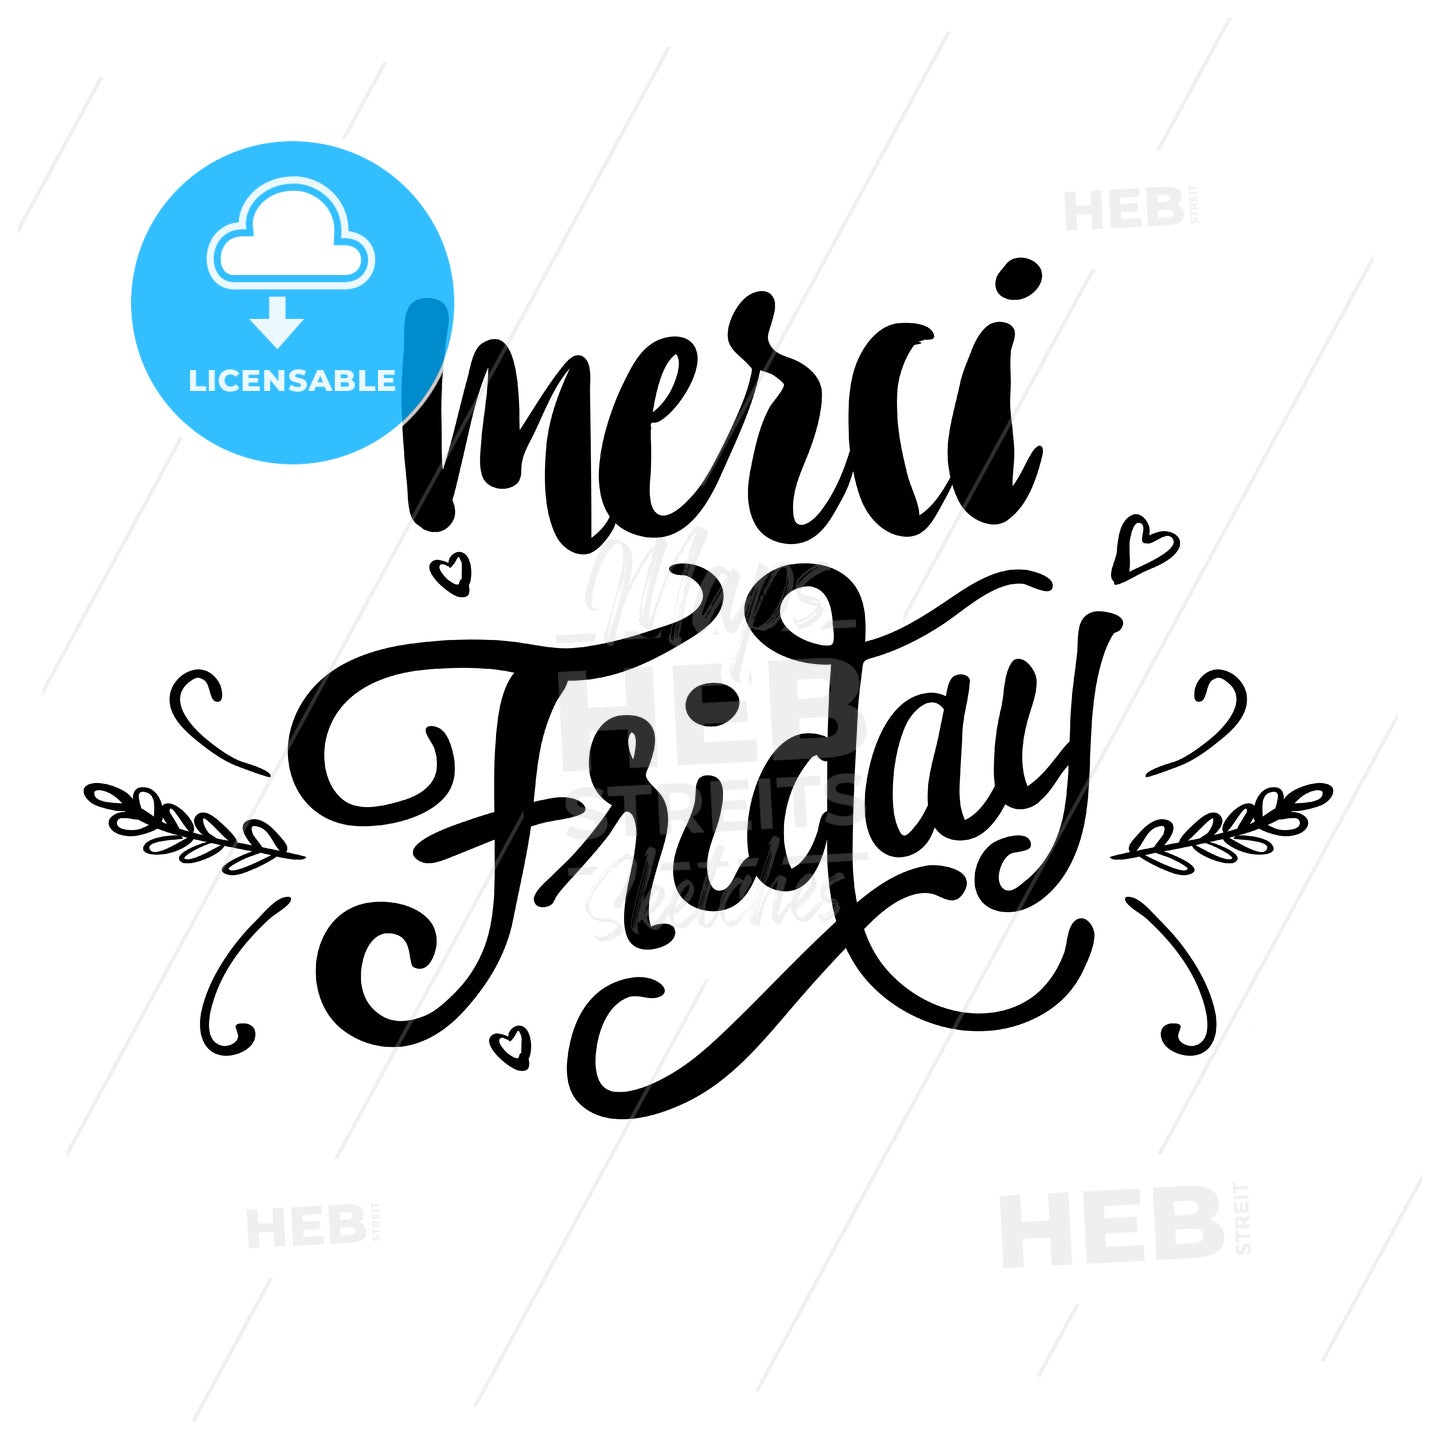 Merci Friday – instant download